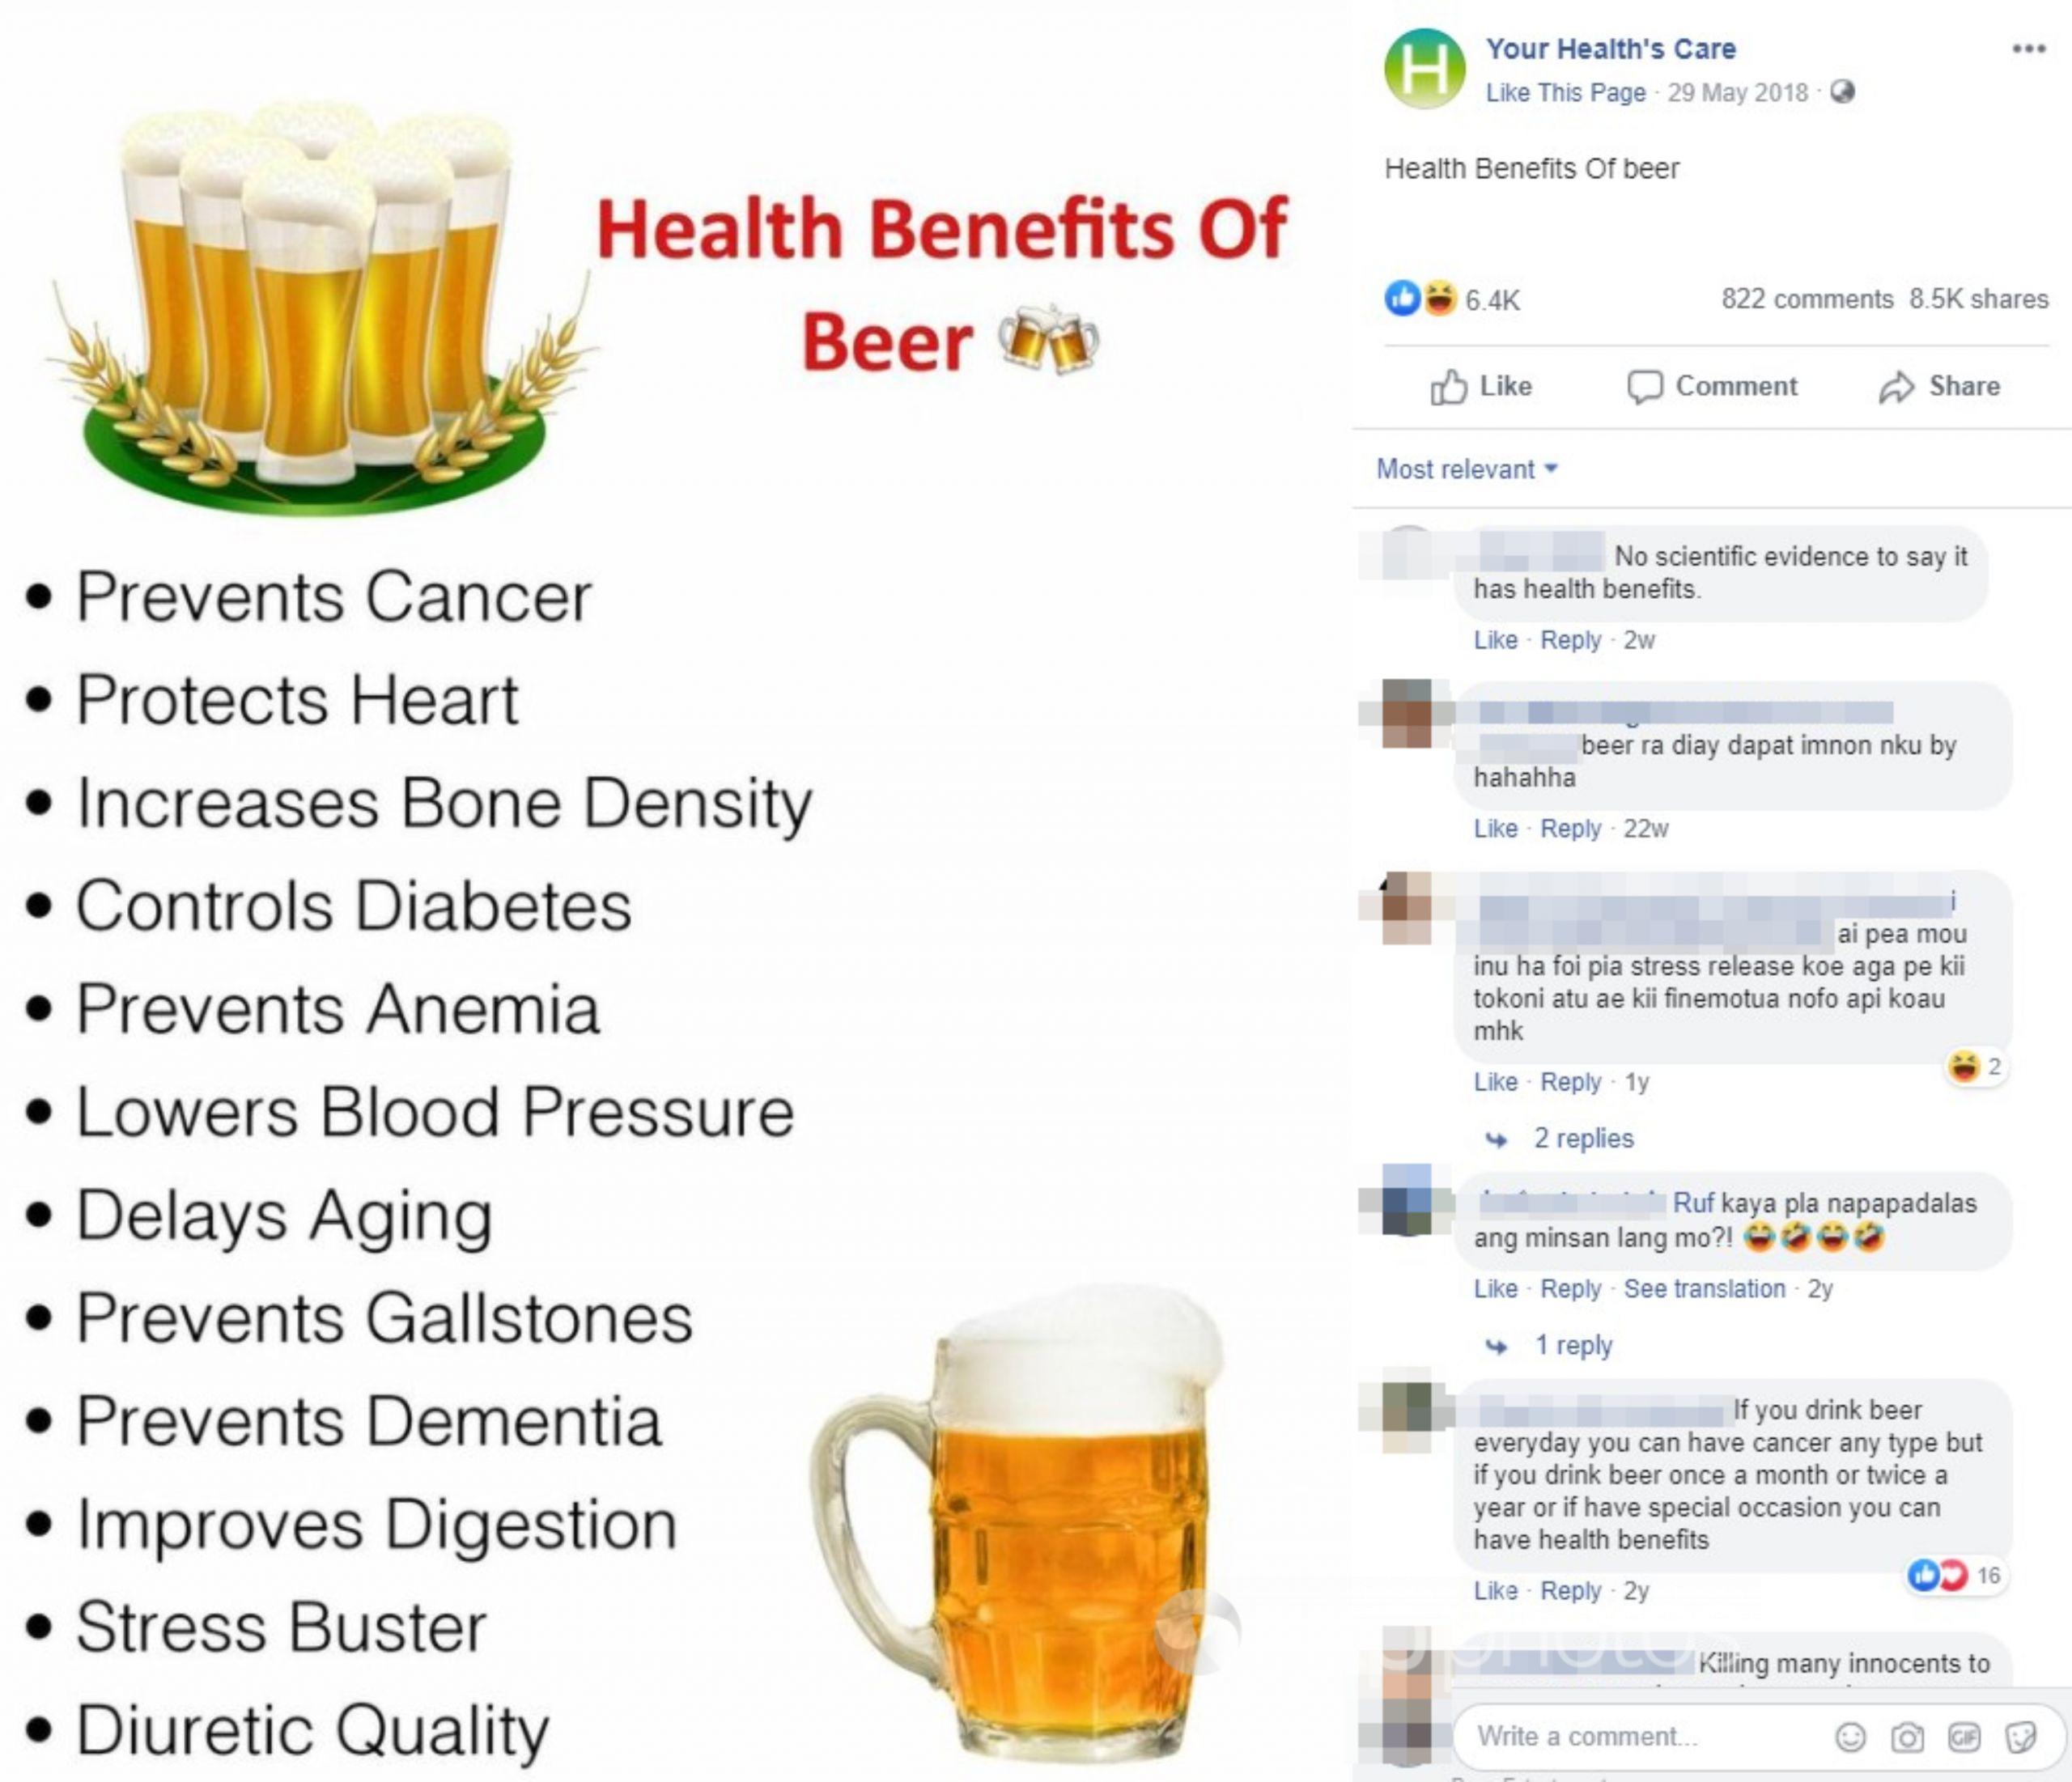 Does alcohol have any health benefits?